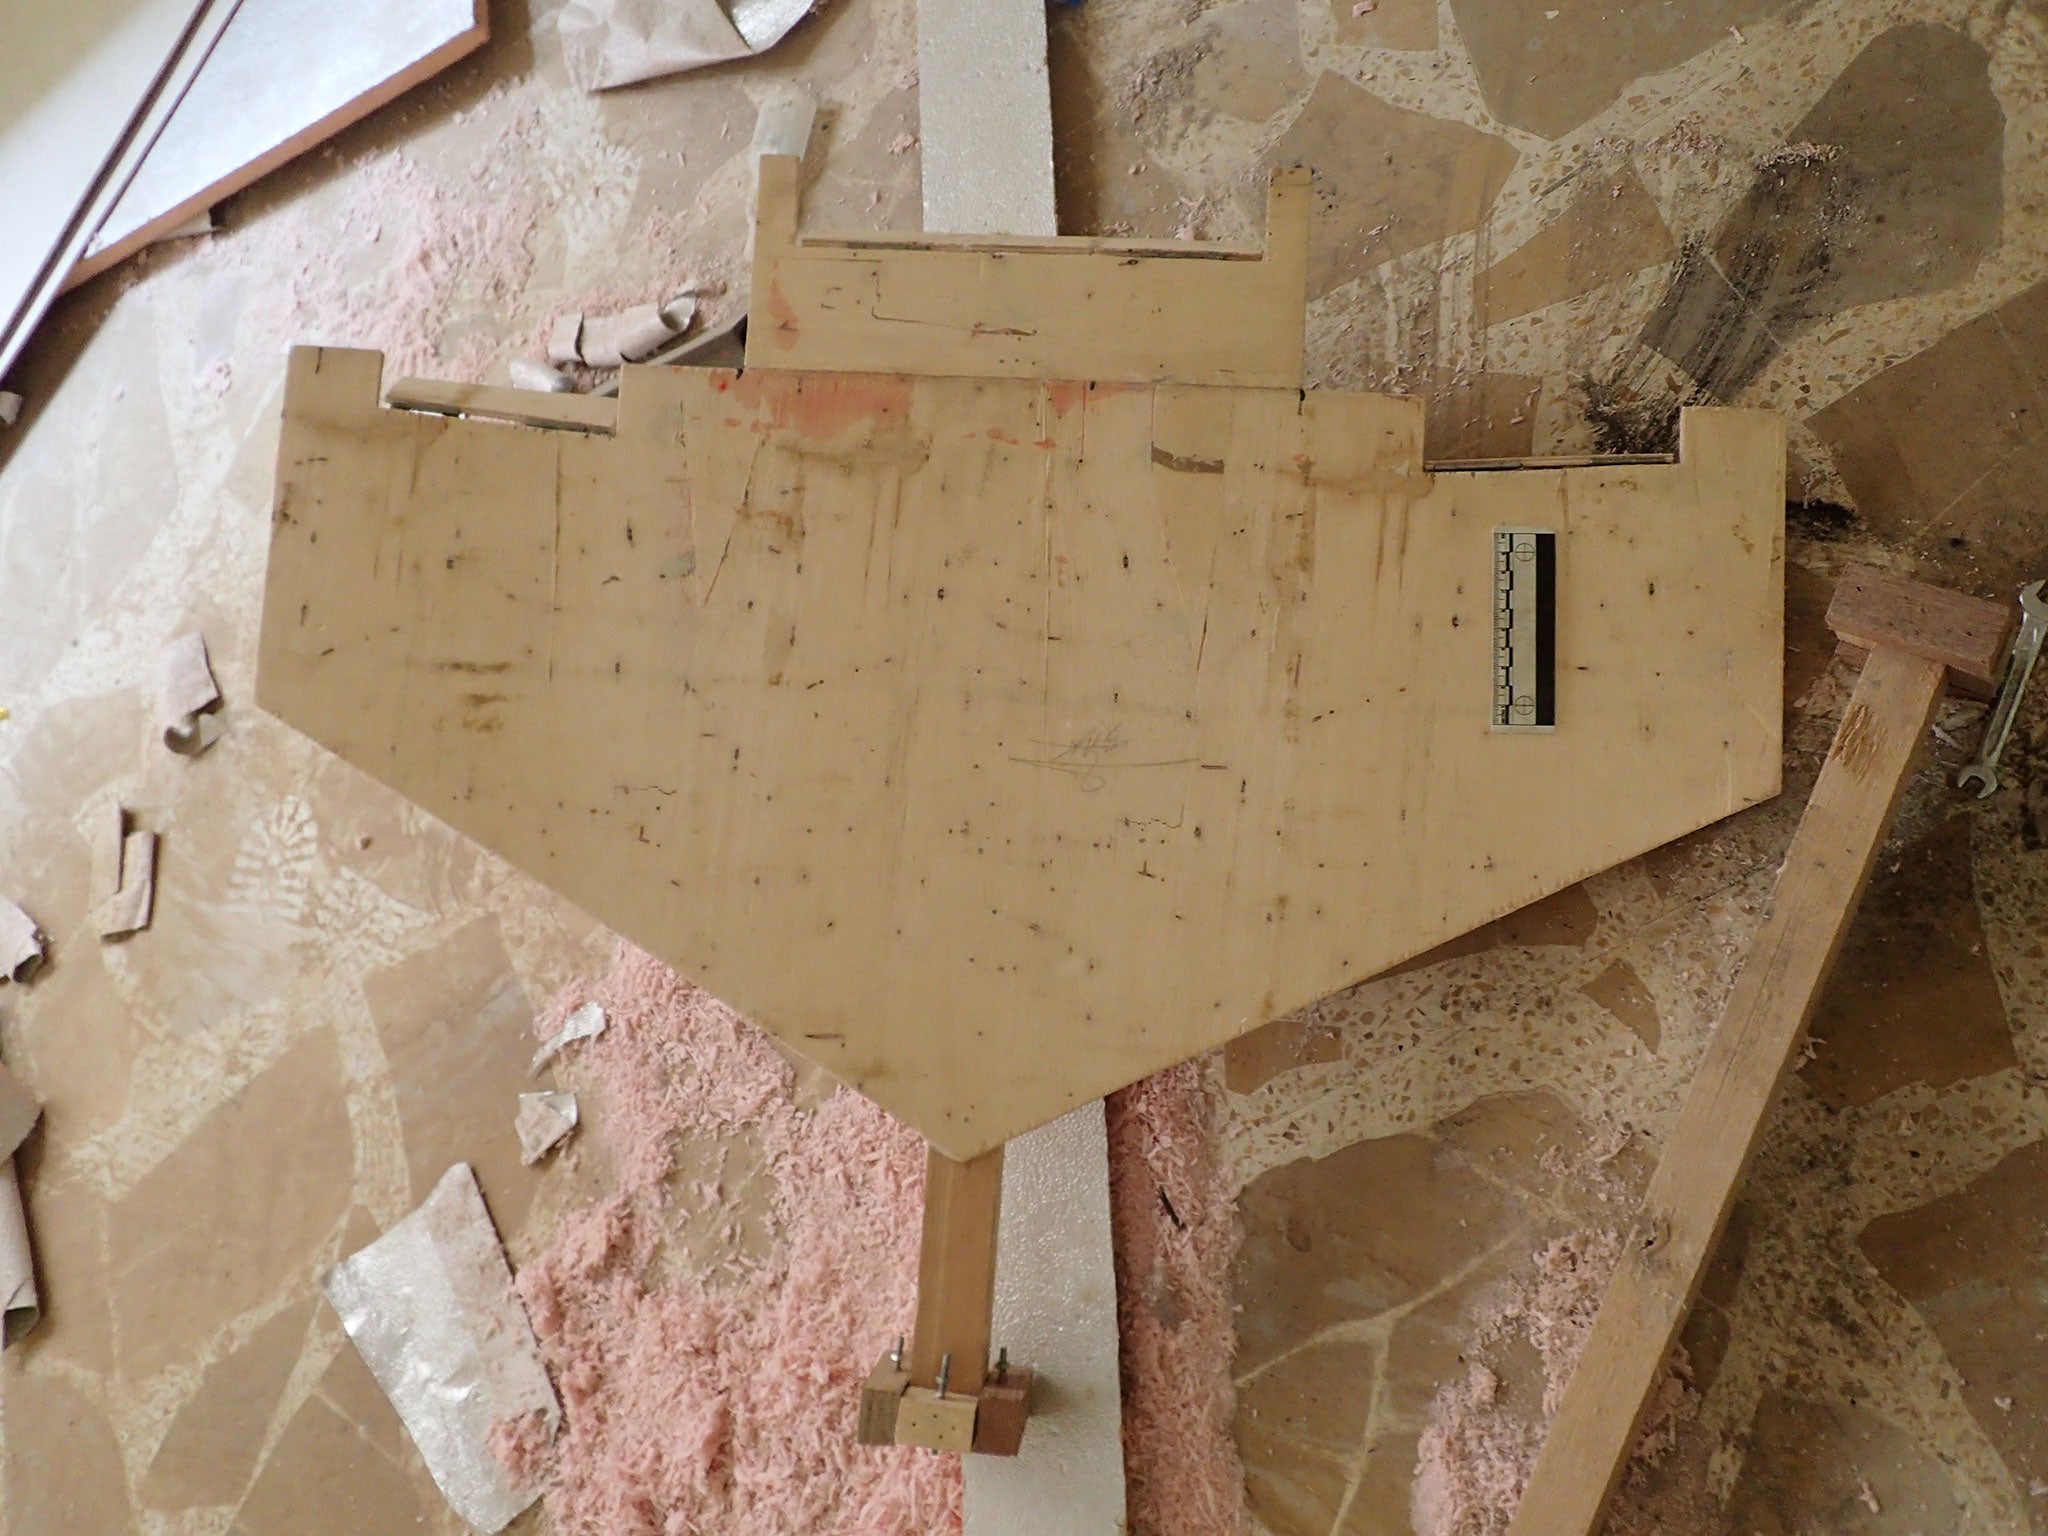 A plywood drone fuselage discovered at an Isis workshop in Ramadi, Iraq, in February 2016